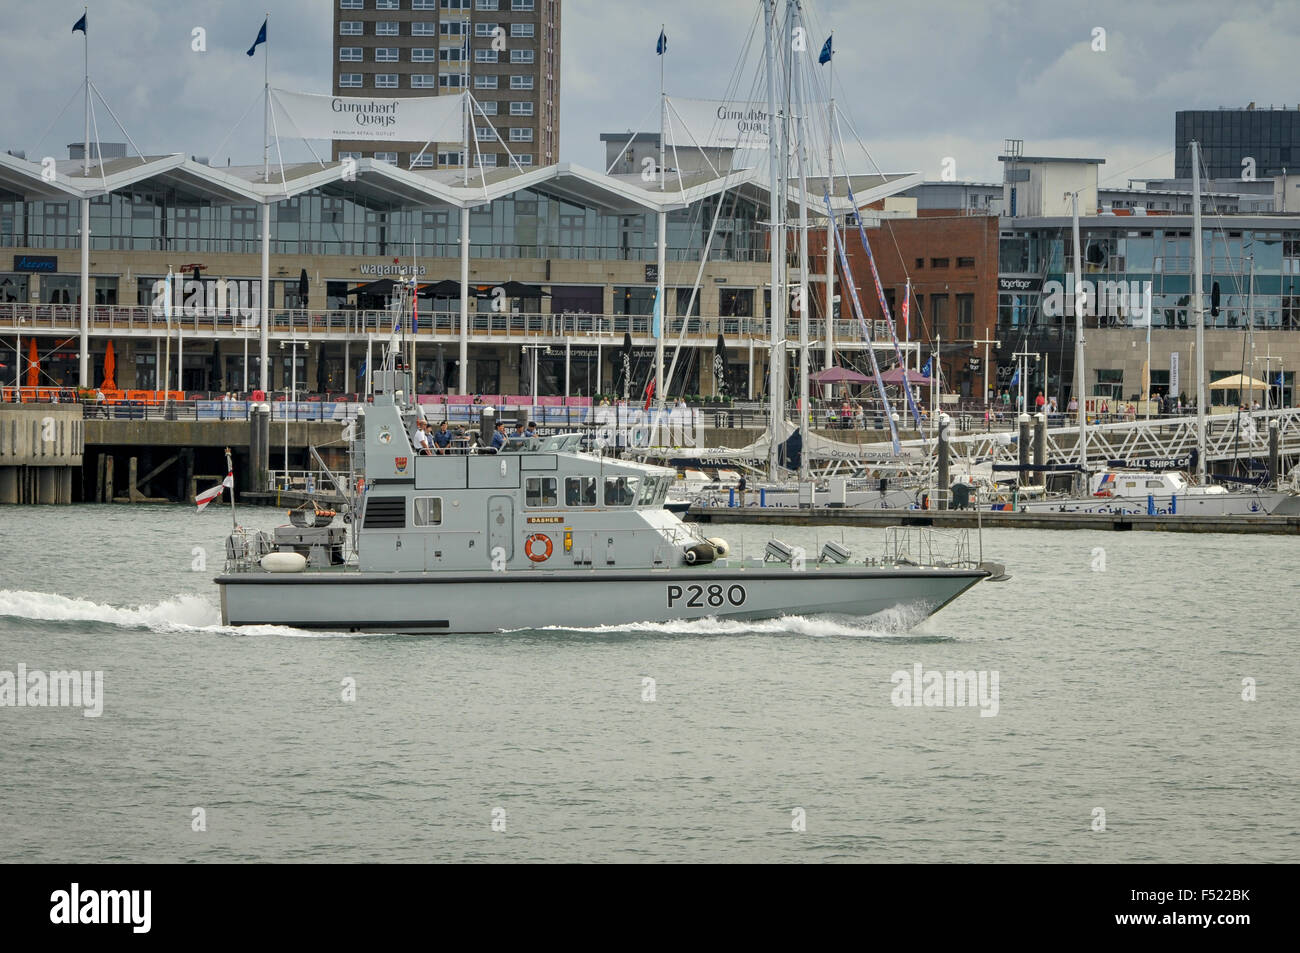 HMS Dasher, P280 Royal Navy patrol and training vessel in the entrance to Portsmouth Harbour, UK. Stock Photo